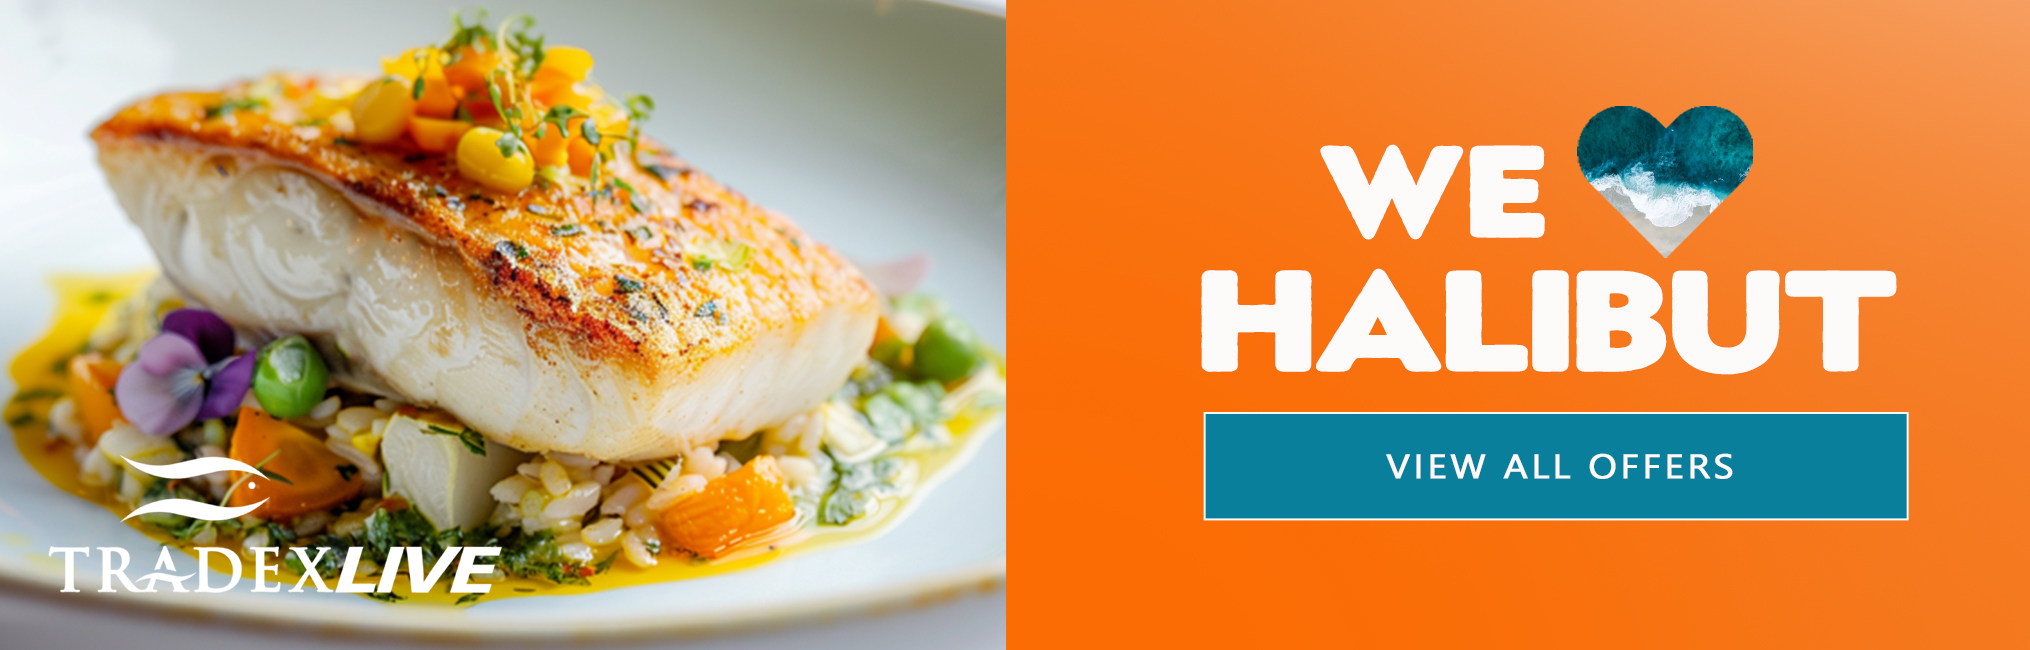 VIEW ALL HALIBUT OFFERS ON TRADEXLIVE